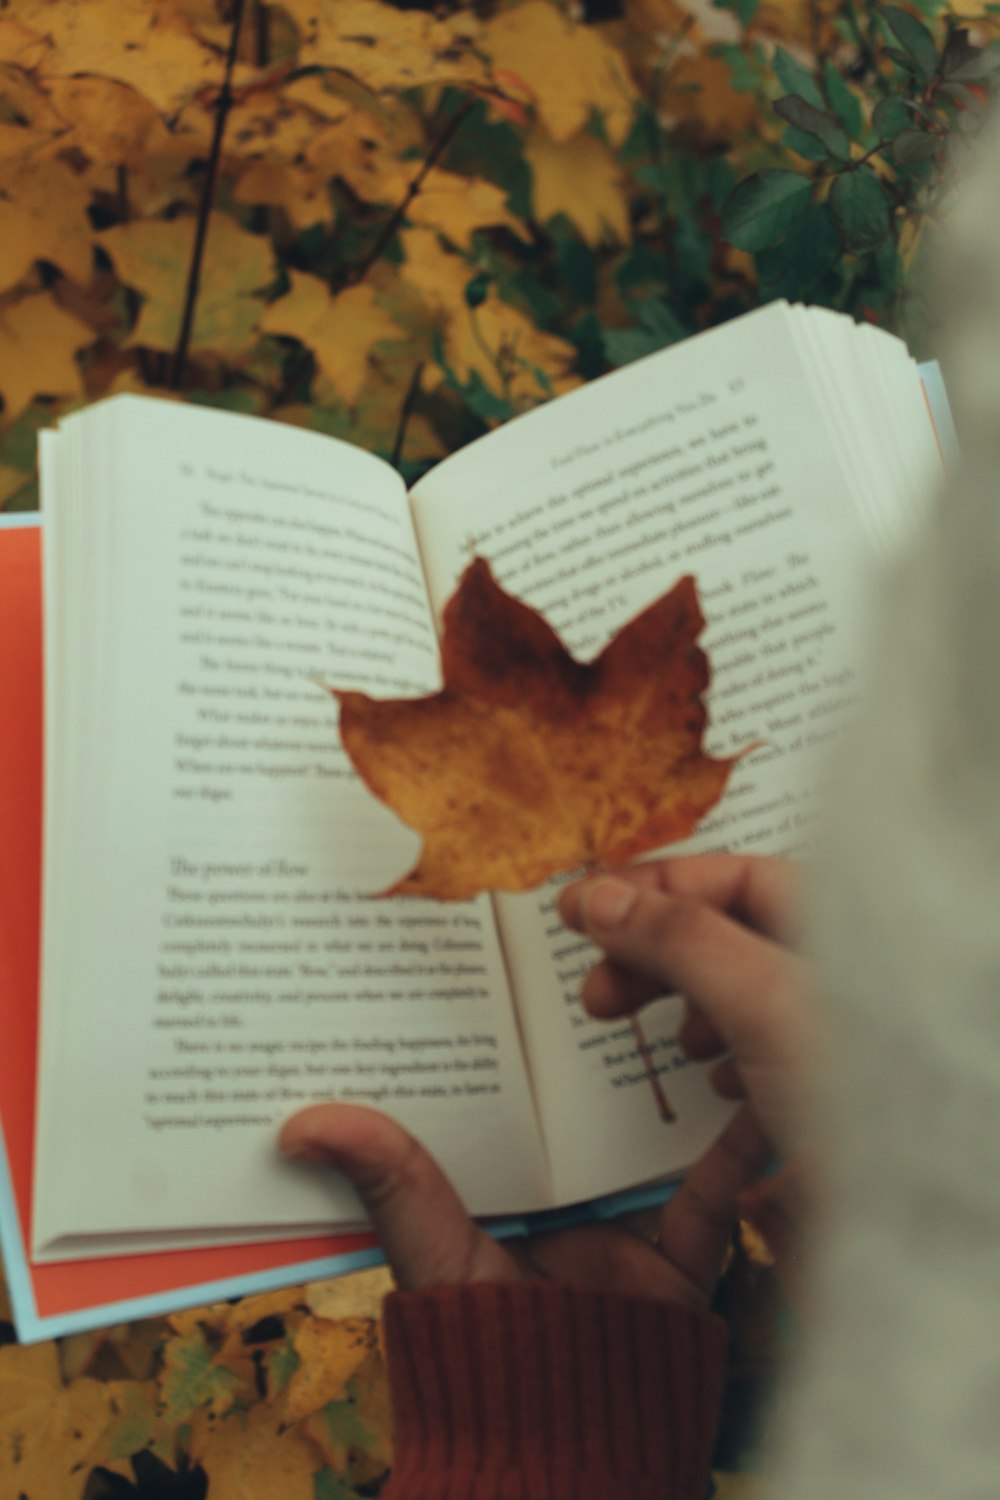 a person holding an open book with a leaf on it